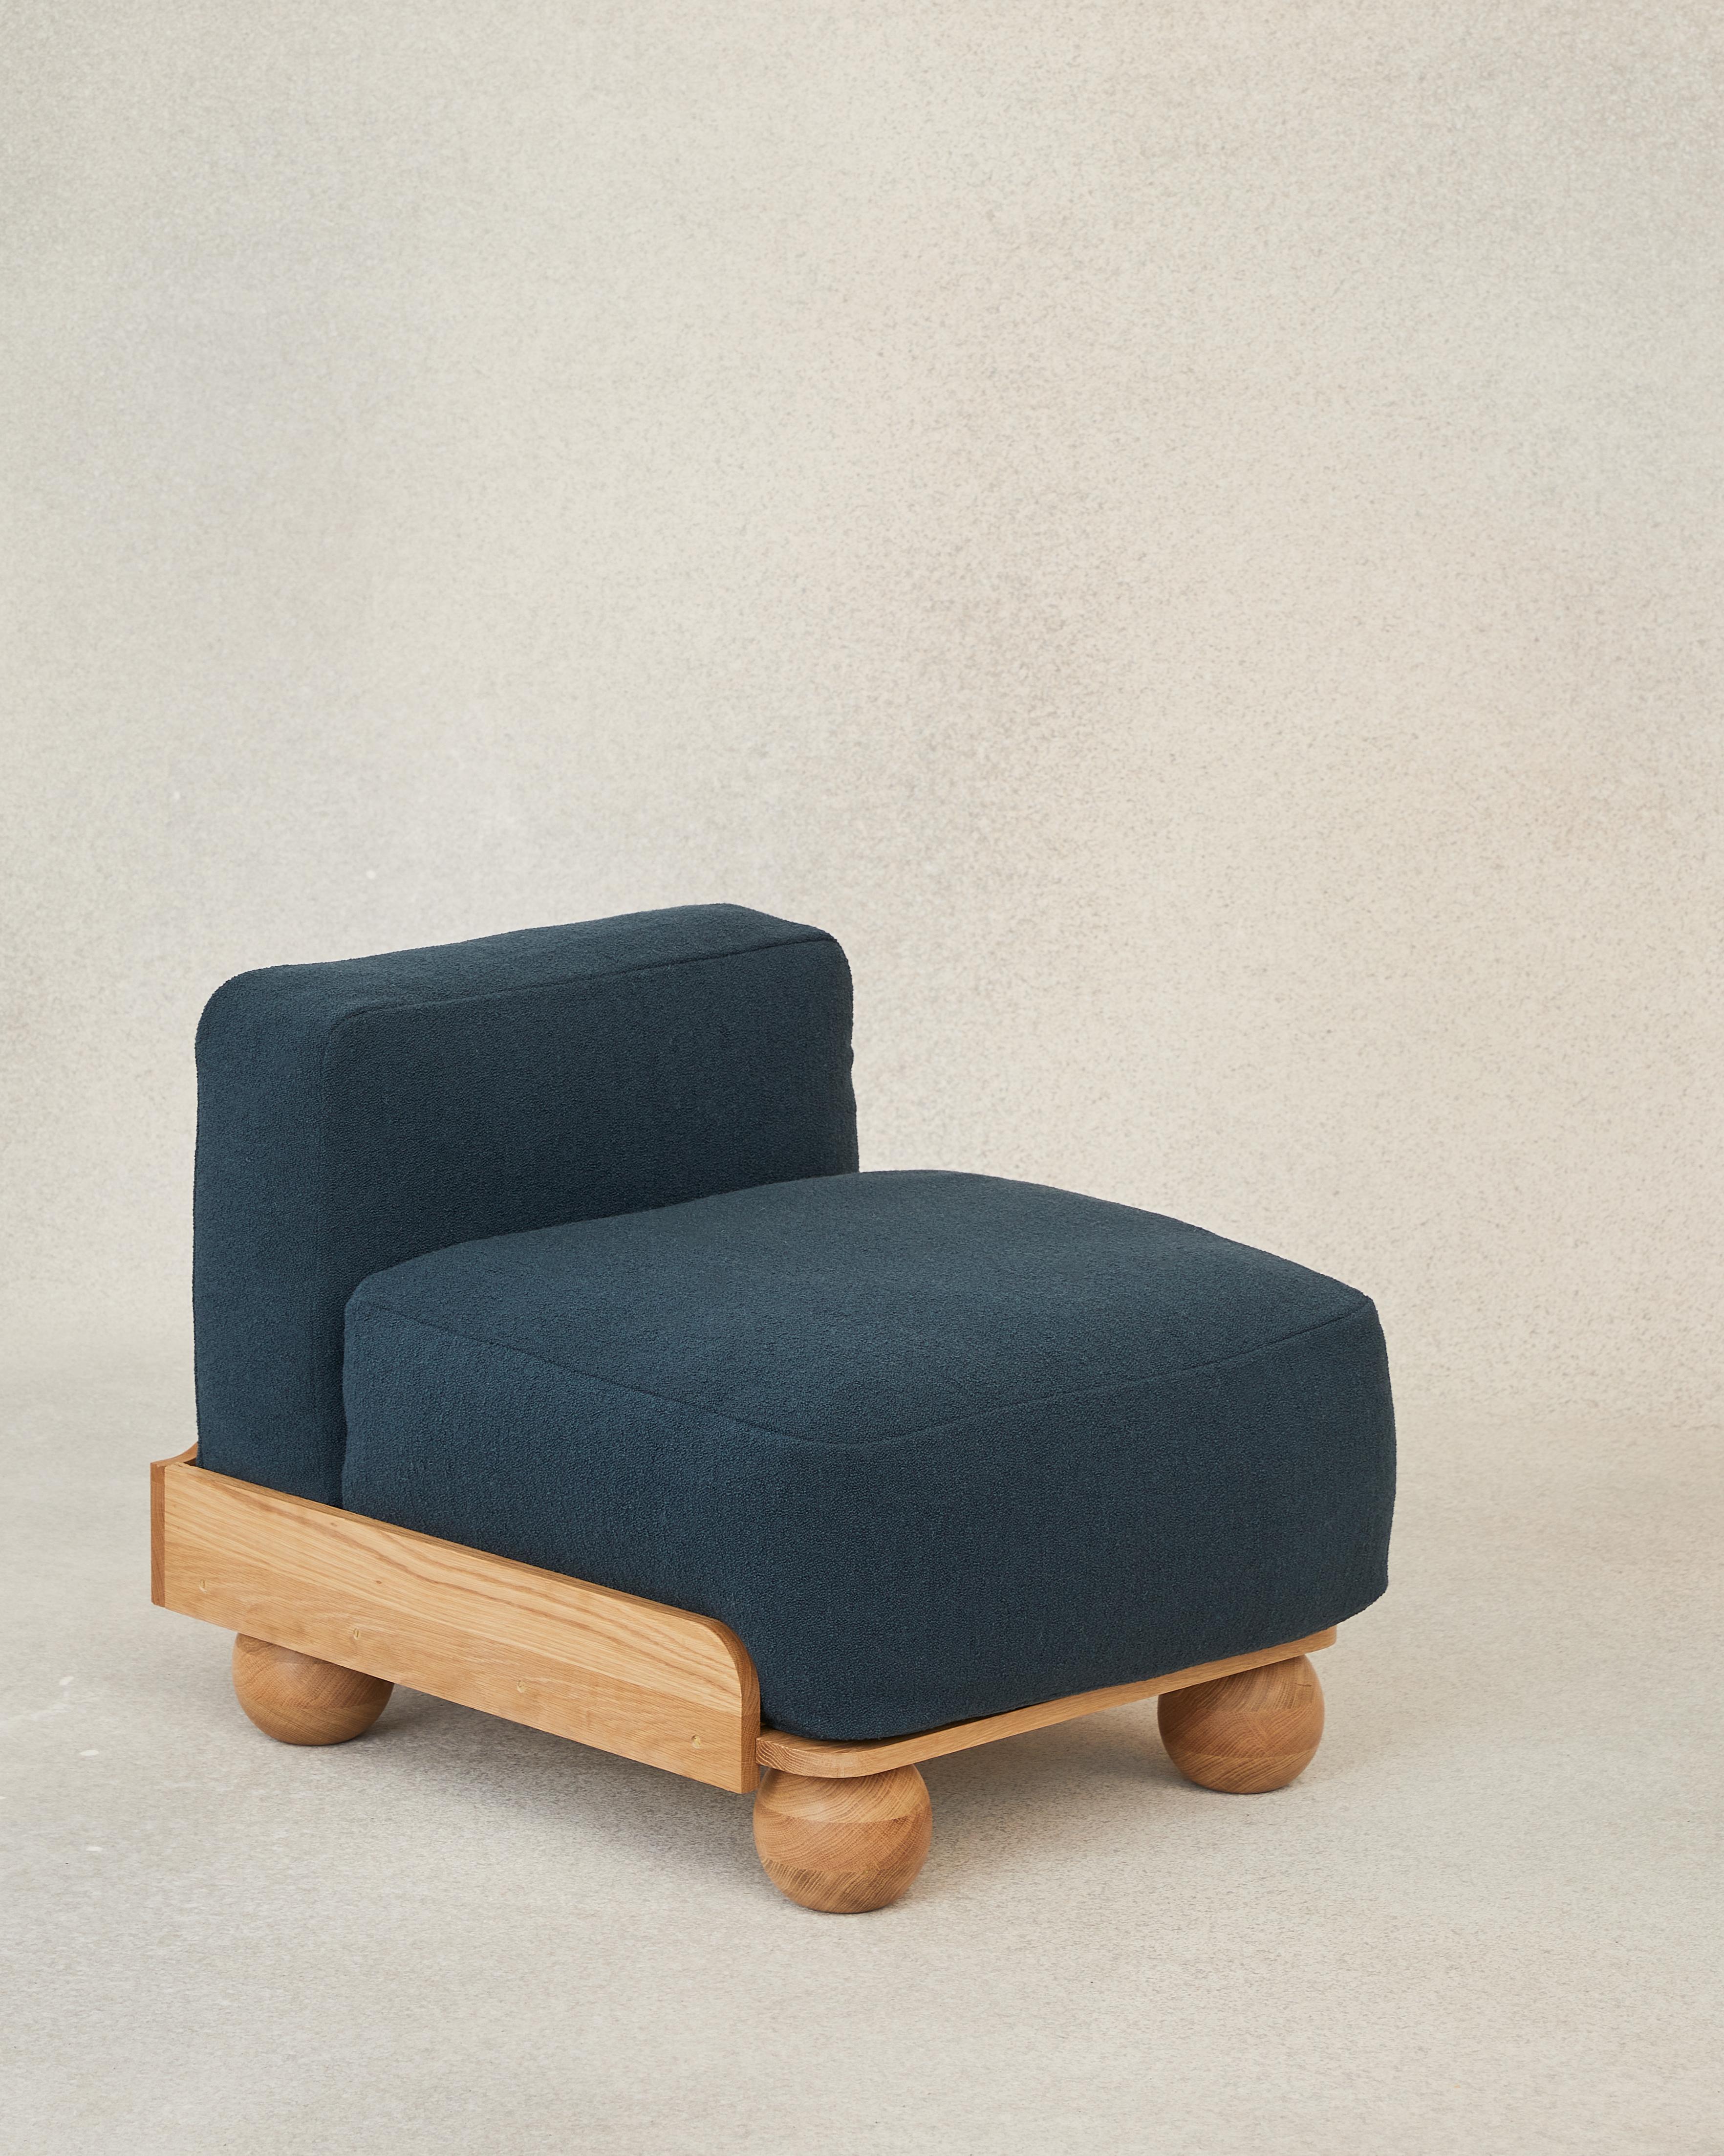 The Cove Slipper is a pared back armless seat designed to stand alone or join its modular family: combined into a sofa of any length or paired with the Cove Footstool to make a chaise lounge.

Like its Cove siblings, the Sipper reveals all its